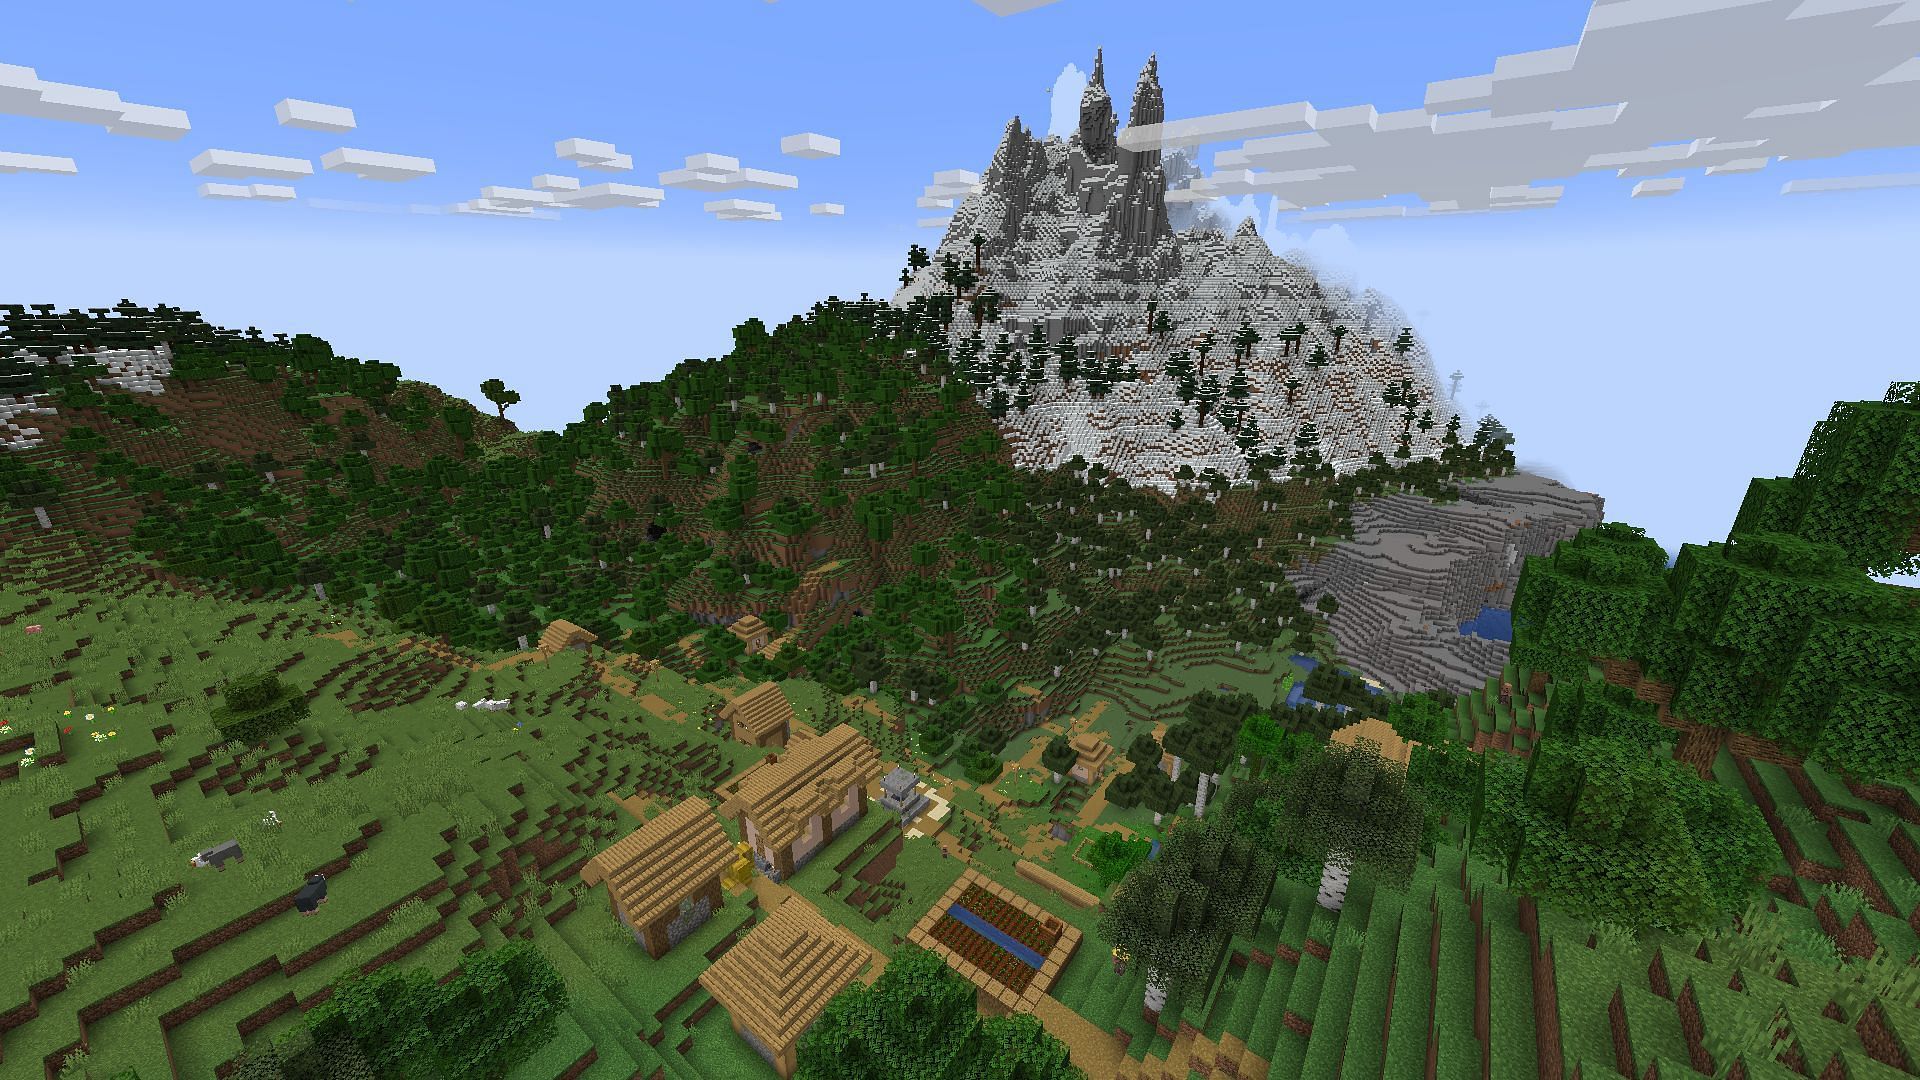 The mountain in this Minecraft island seed is more inhospitable than its surrounding villages (Image via Mojang)